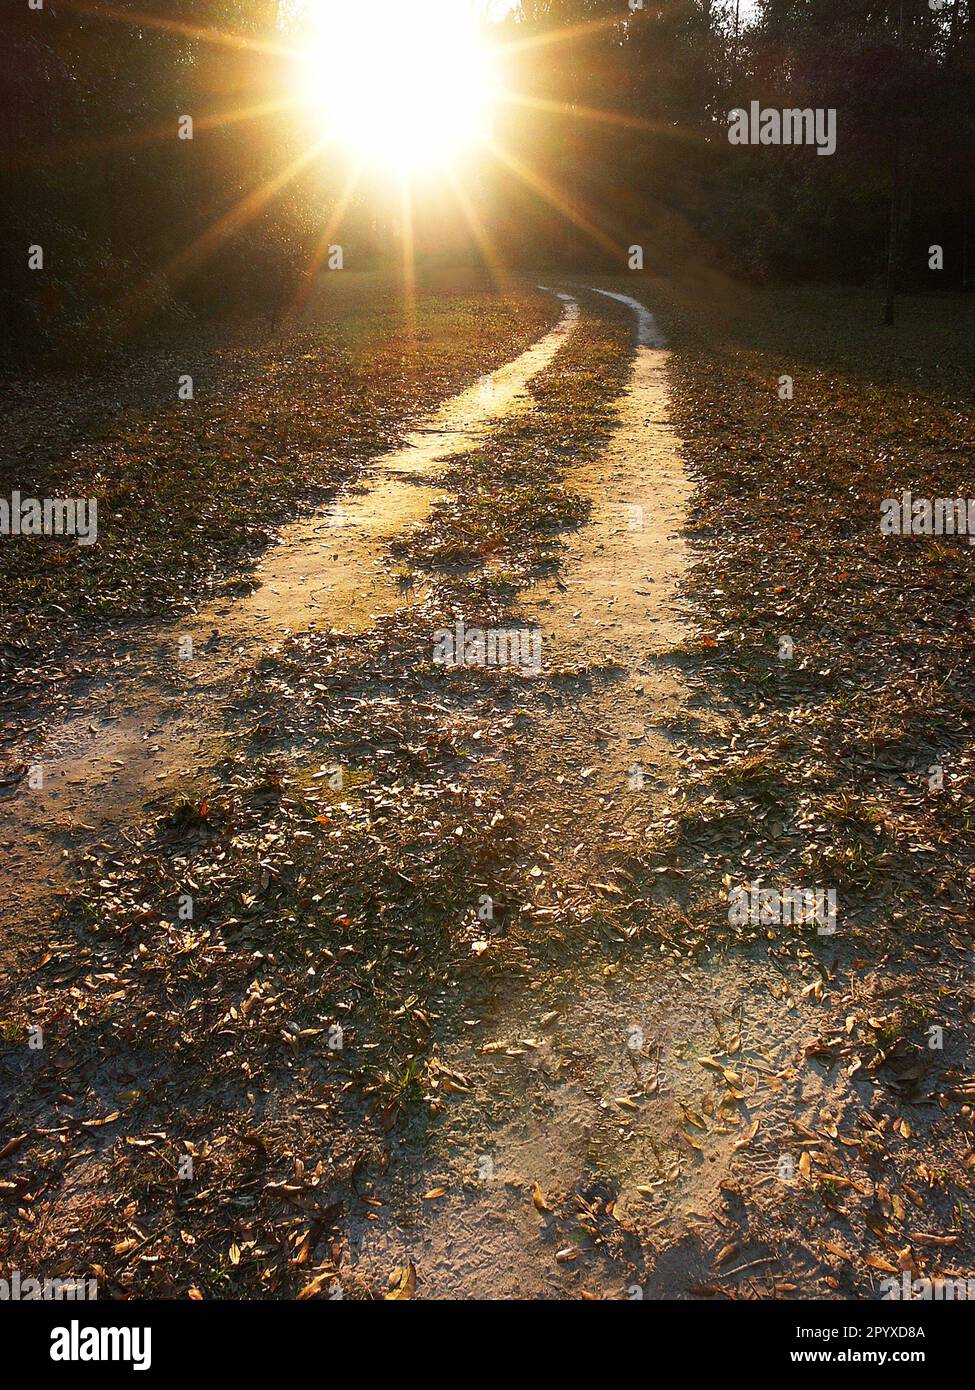 Setting sun illuminates a driveway in late afternoon. Stock Photo